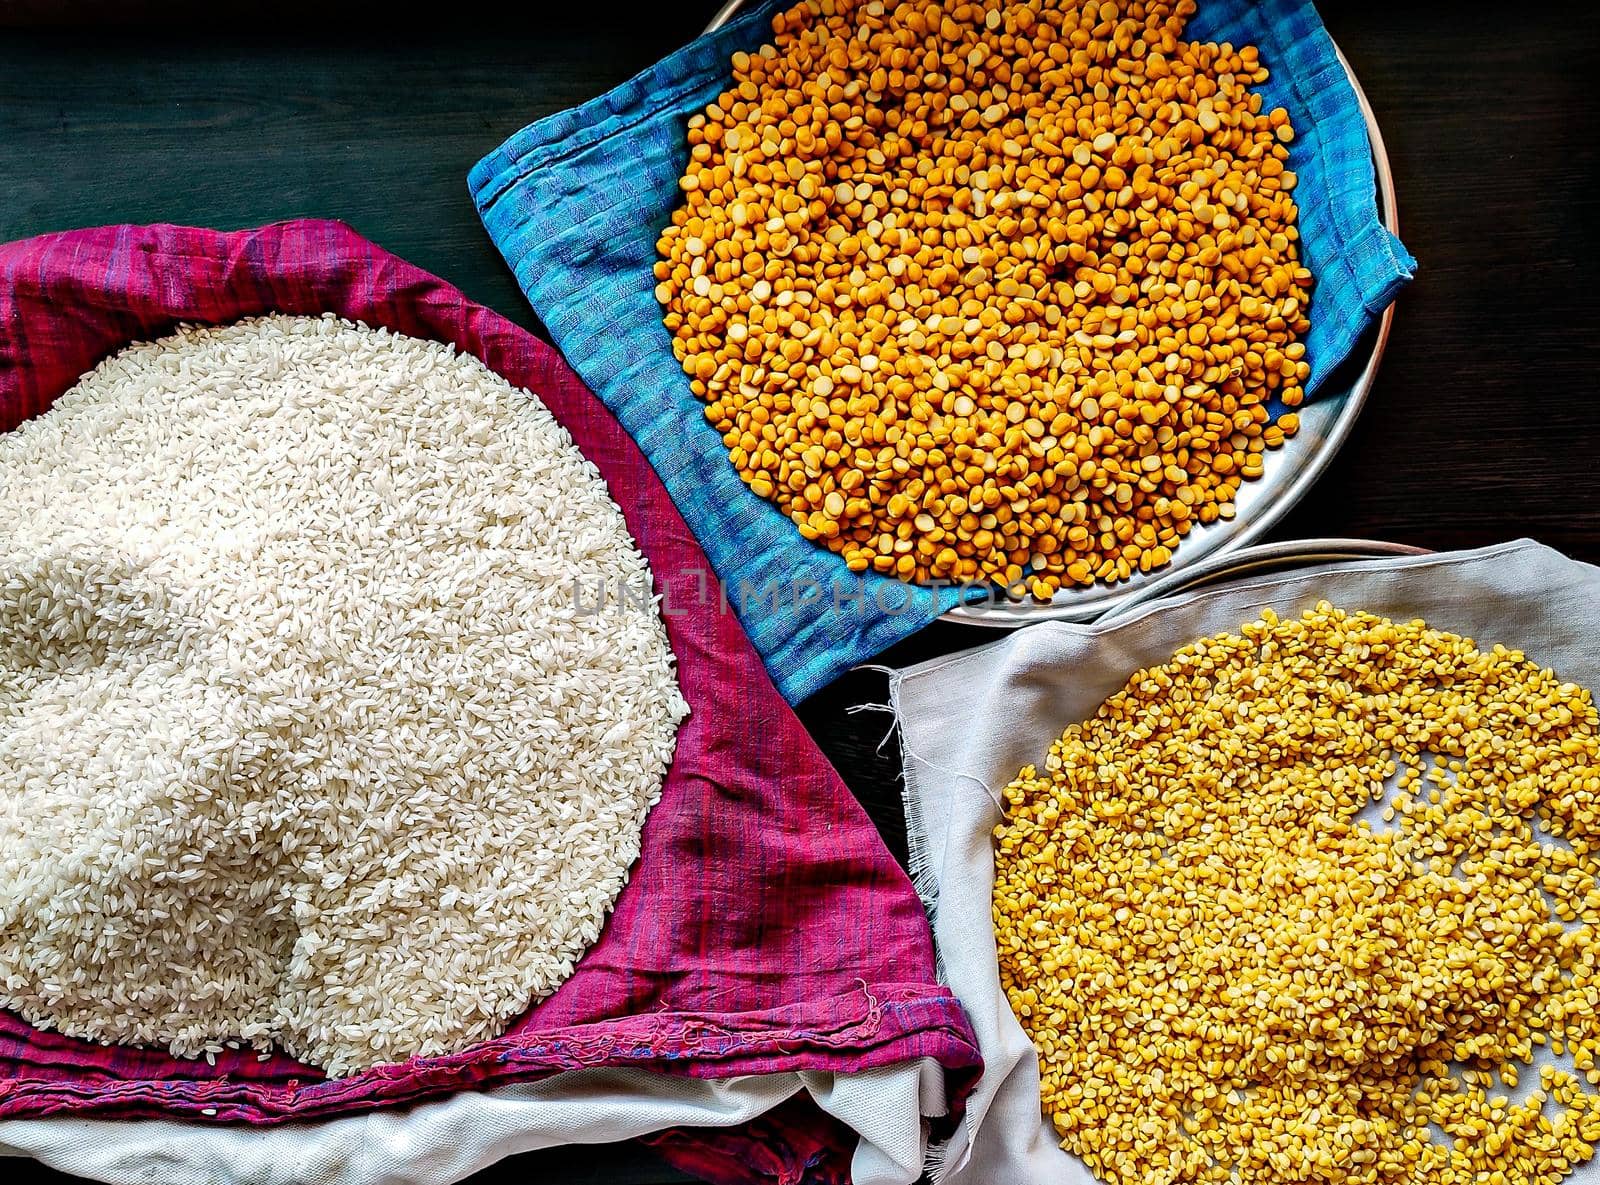 Close up image of freshly washed pulses for preparation of cooking.